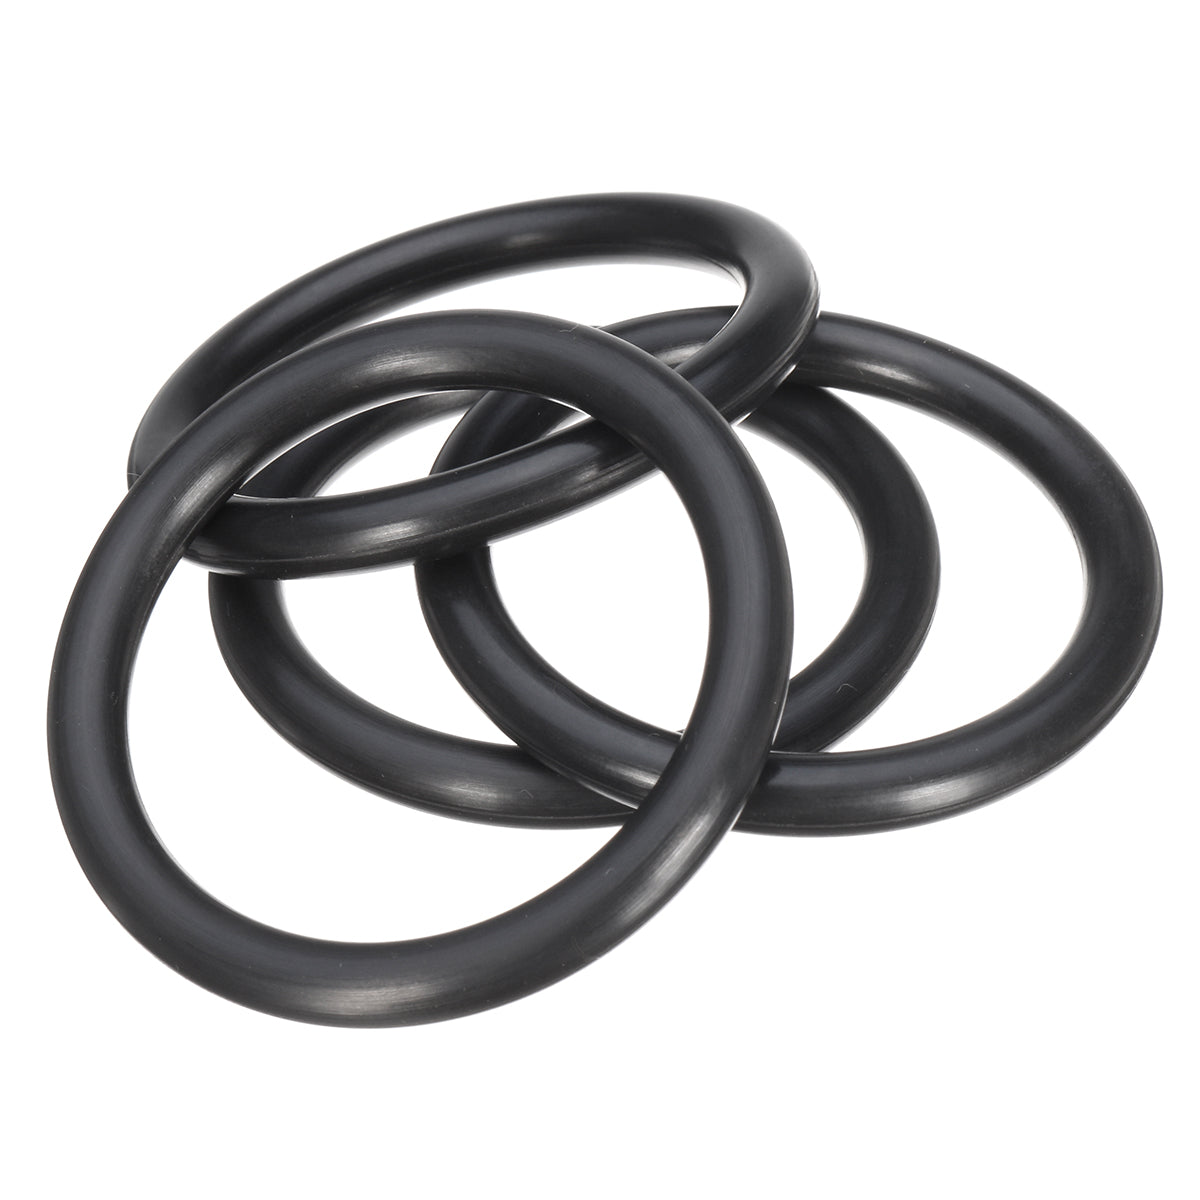 Dark Slate Gray 4pcs 5.5cm Bumper Fender Quick Release Fasteners Replacement Rubber Band O-Ring